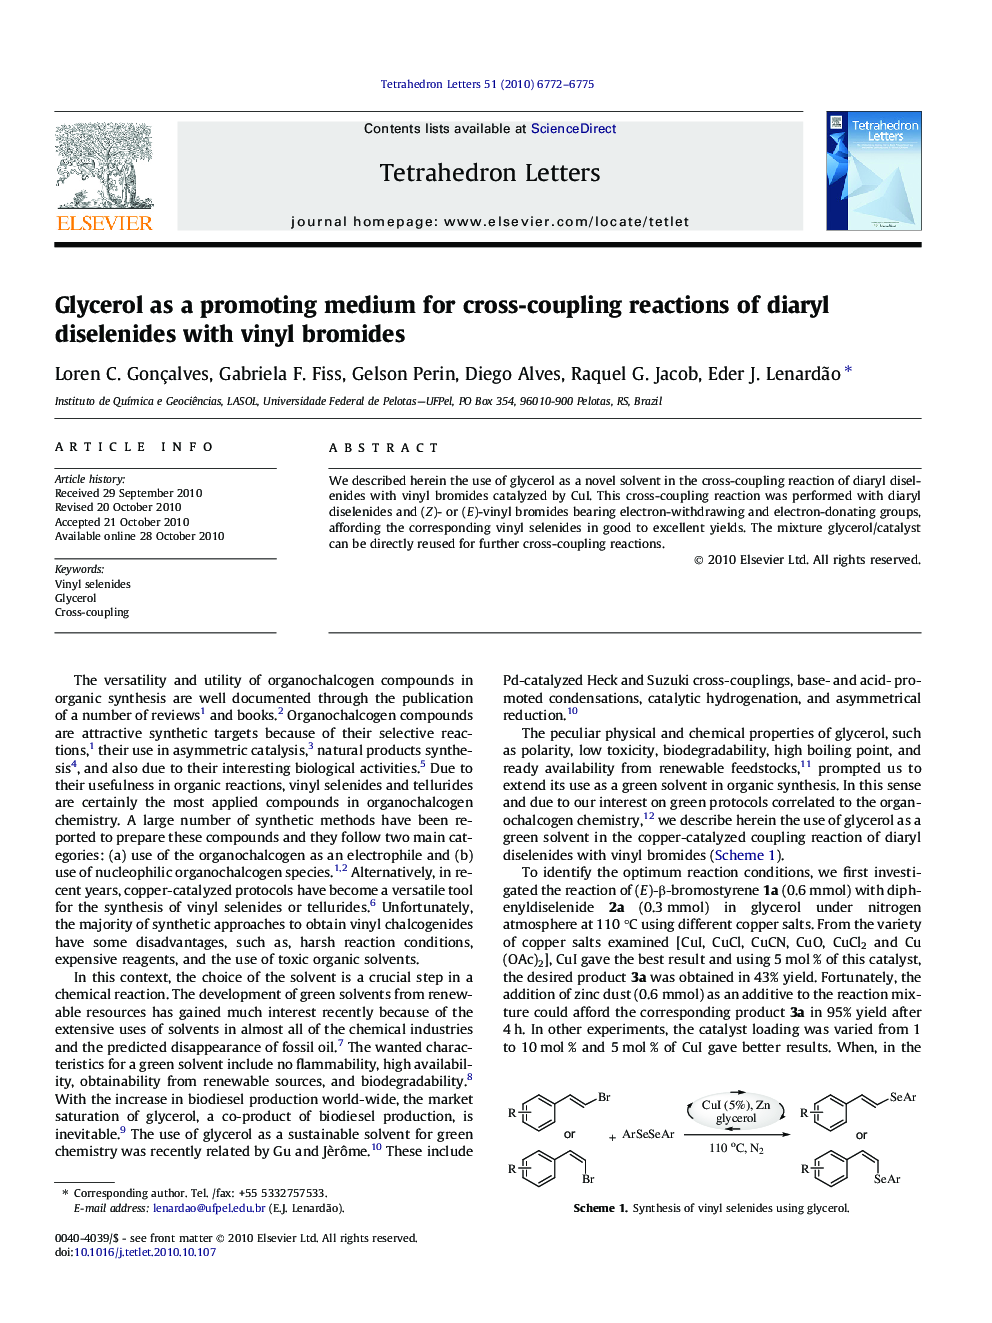 Glycerol as a promoting medium for cross-coupling reactions of diaryl diselenides with vinyl bromides